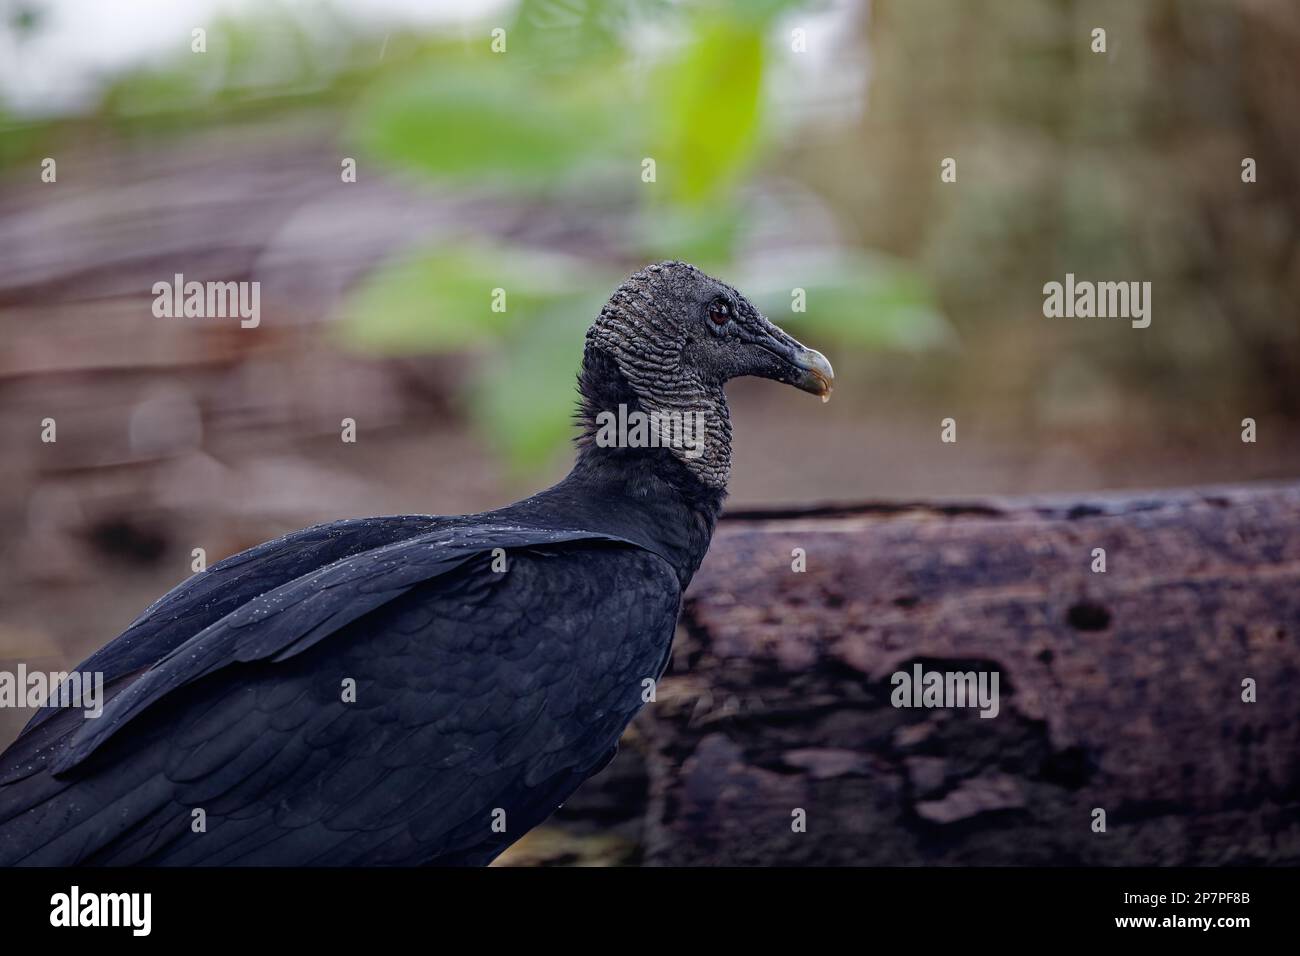 Black vulture scavenging on beach in Costa RIca Stock Photo